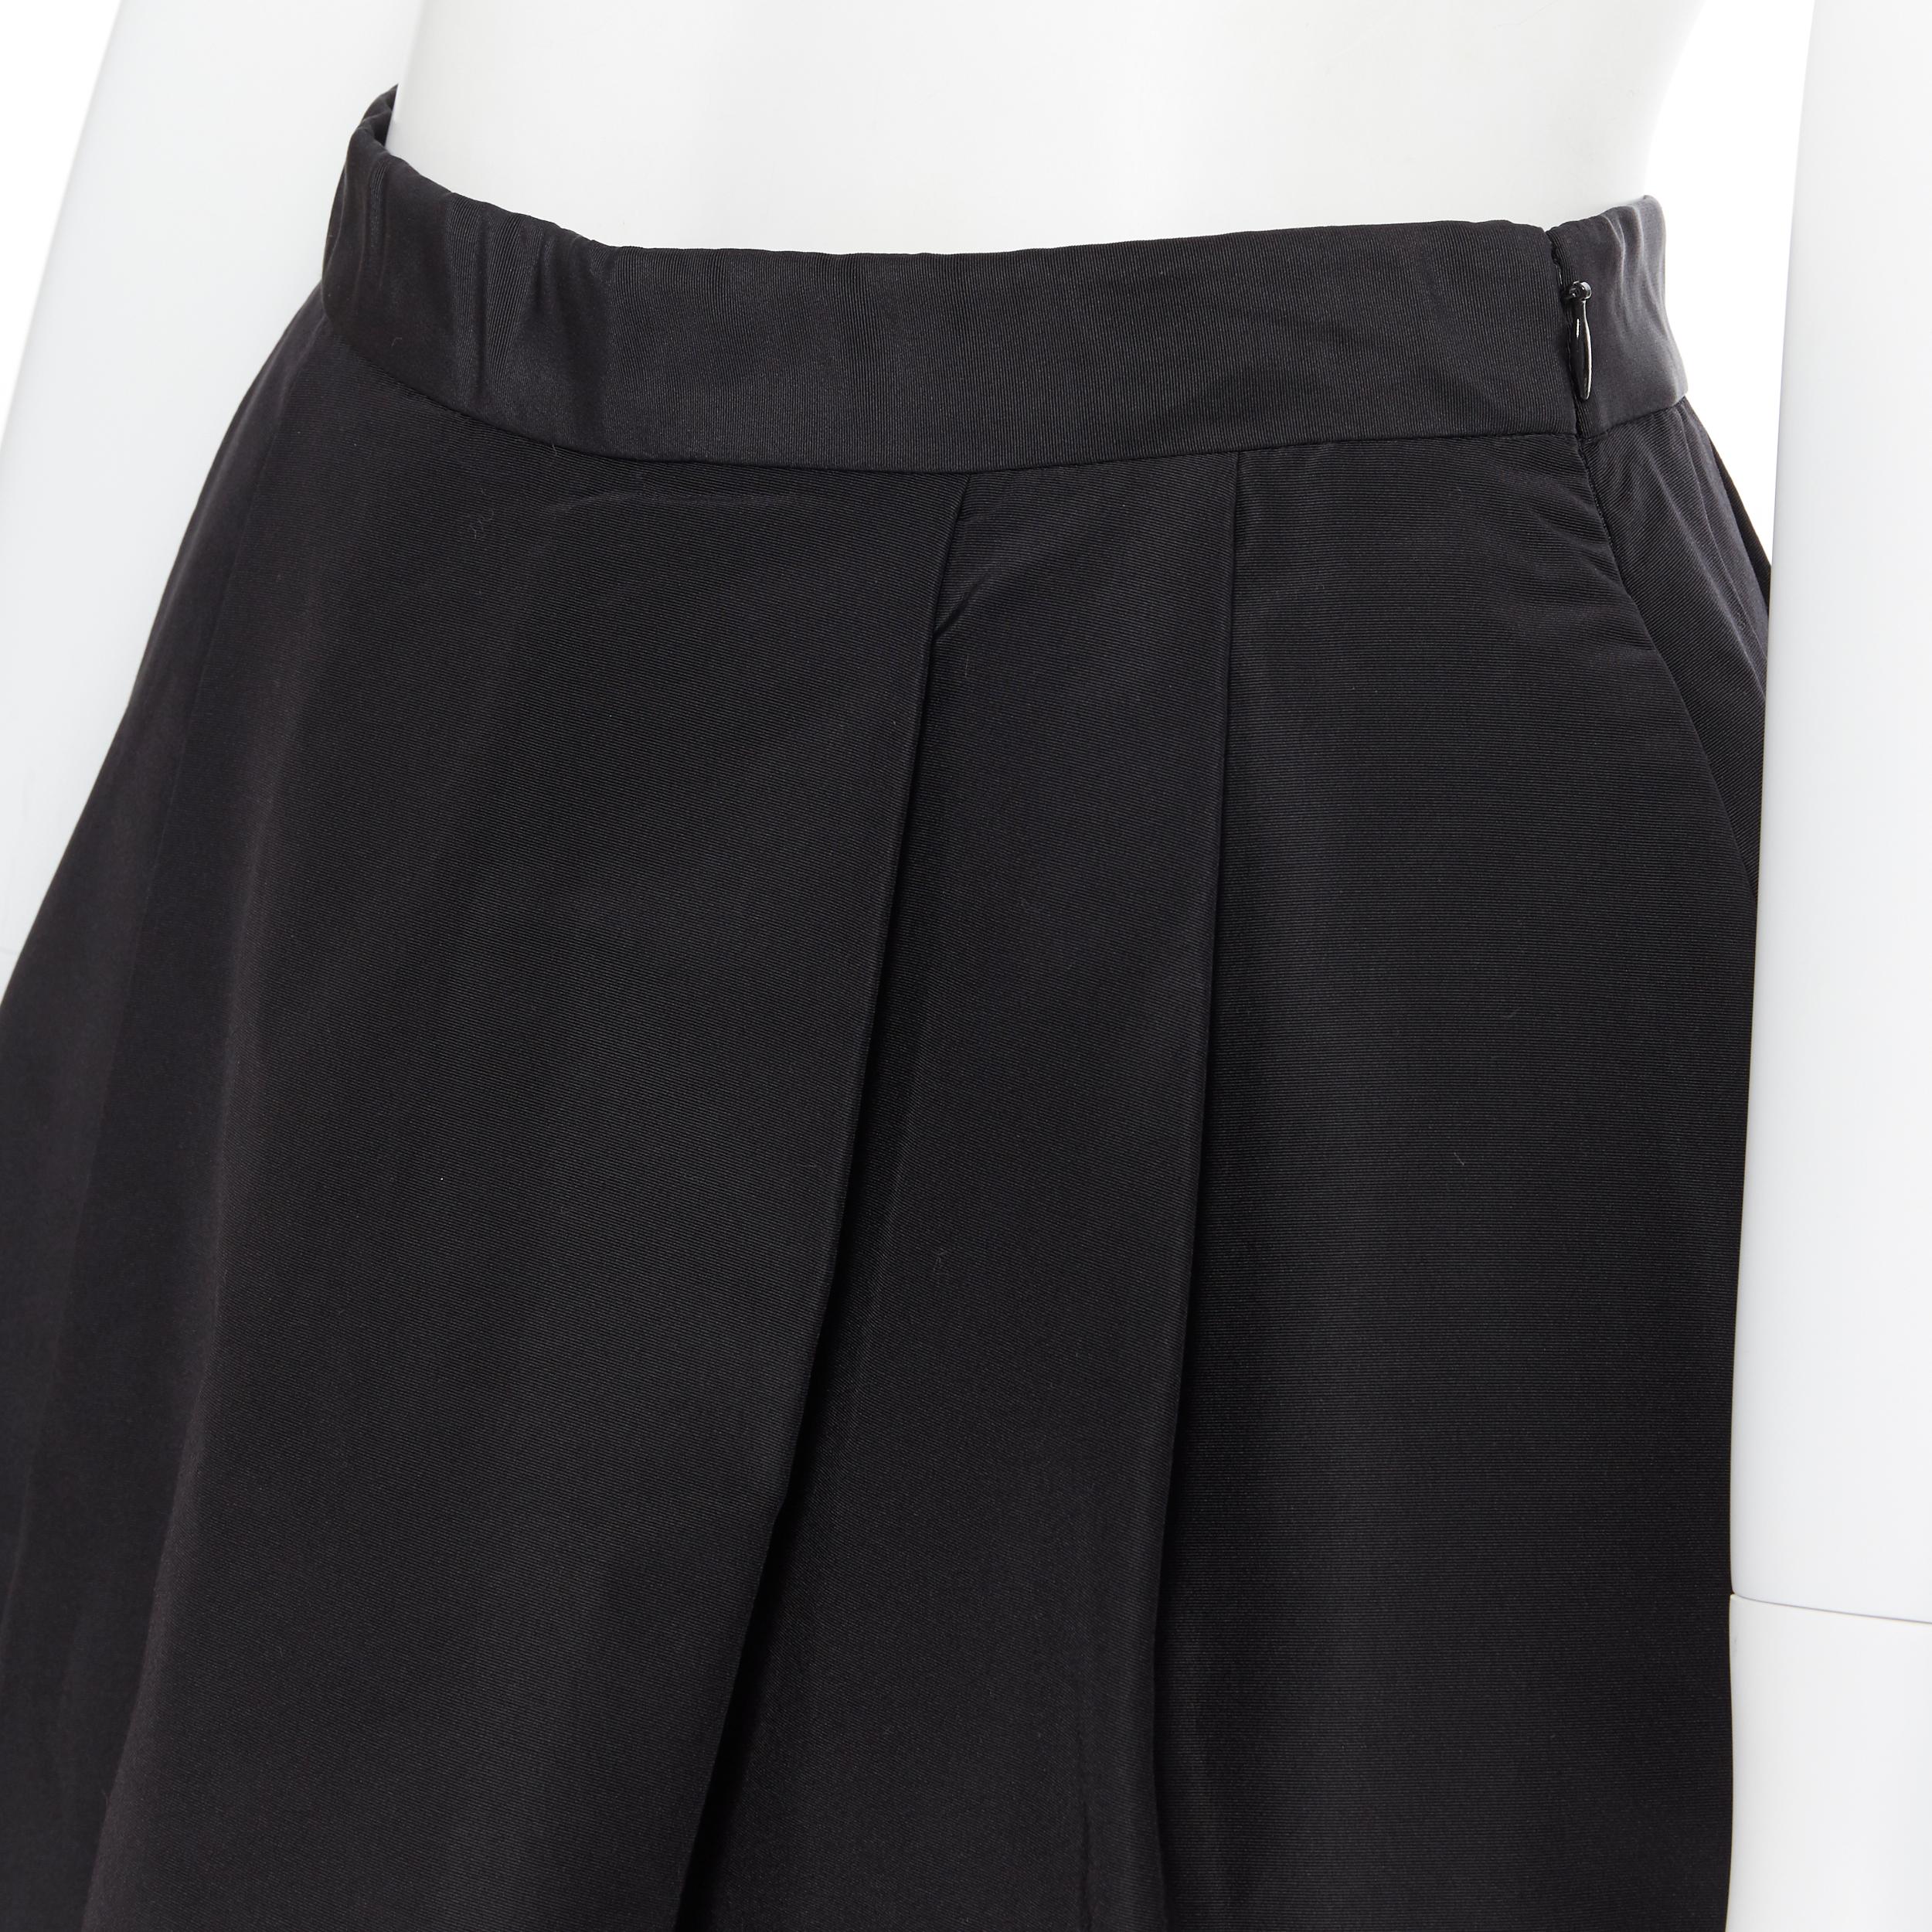 RALPH LAUREN 100% mulberry silk black pleated crin lined flared skirt US0
Brand: Ralph Lauren
Model Name / Style: Flared skirt
Material: Silk
Color: Black
Pattern: Solid
Closure: Zip
Extra Detail: Pleated front. Dual side slit pockets. Crin hem